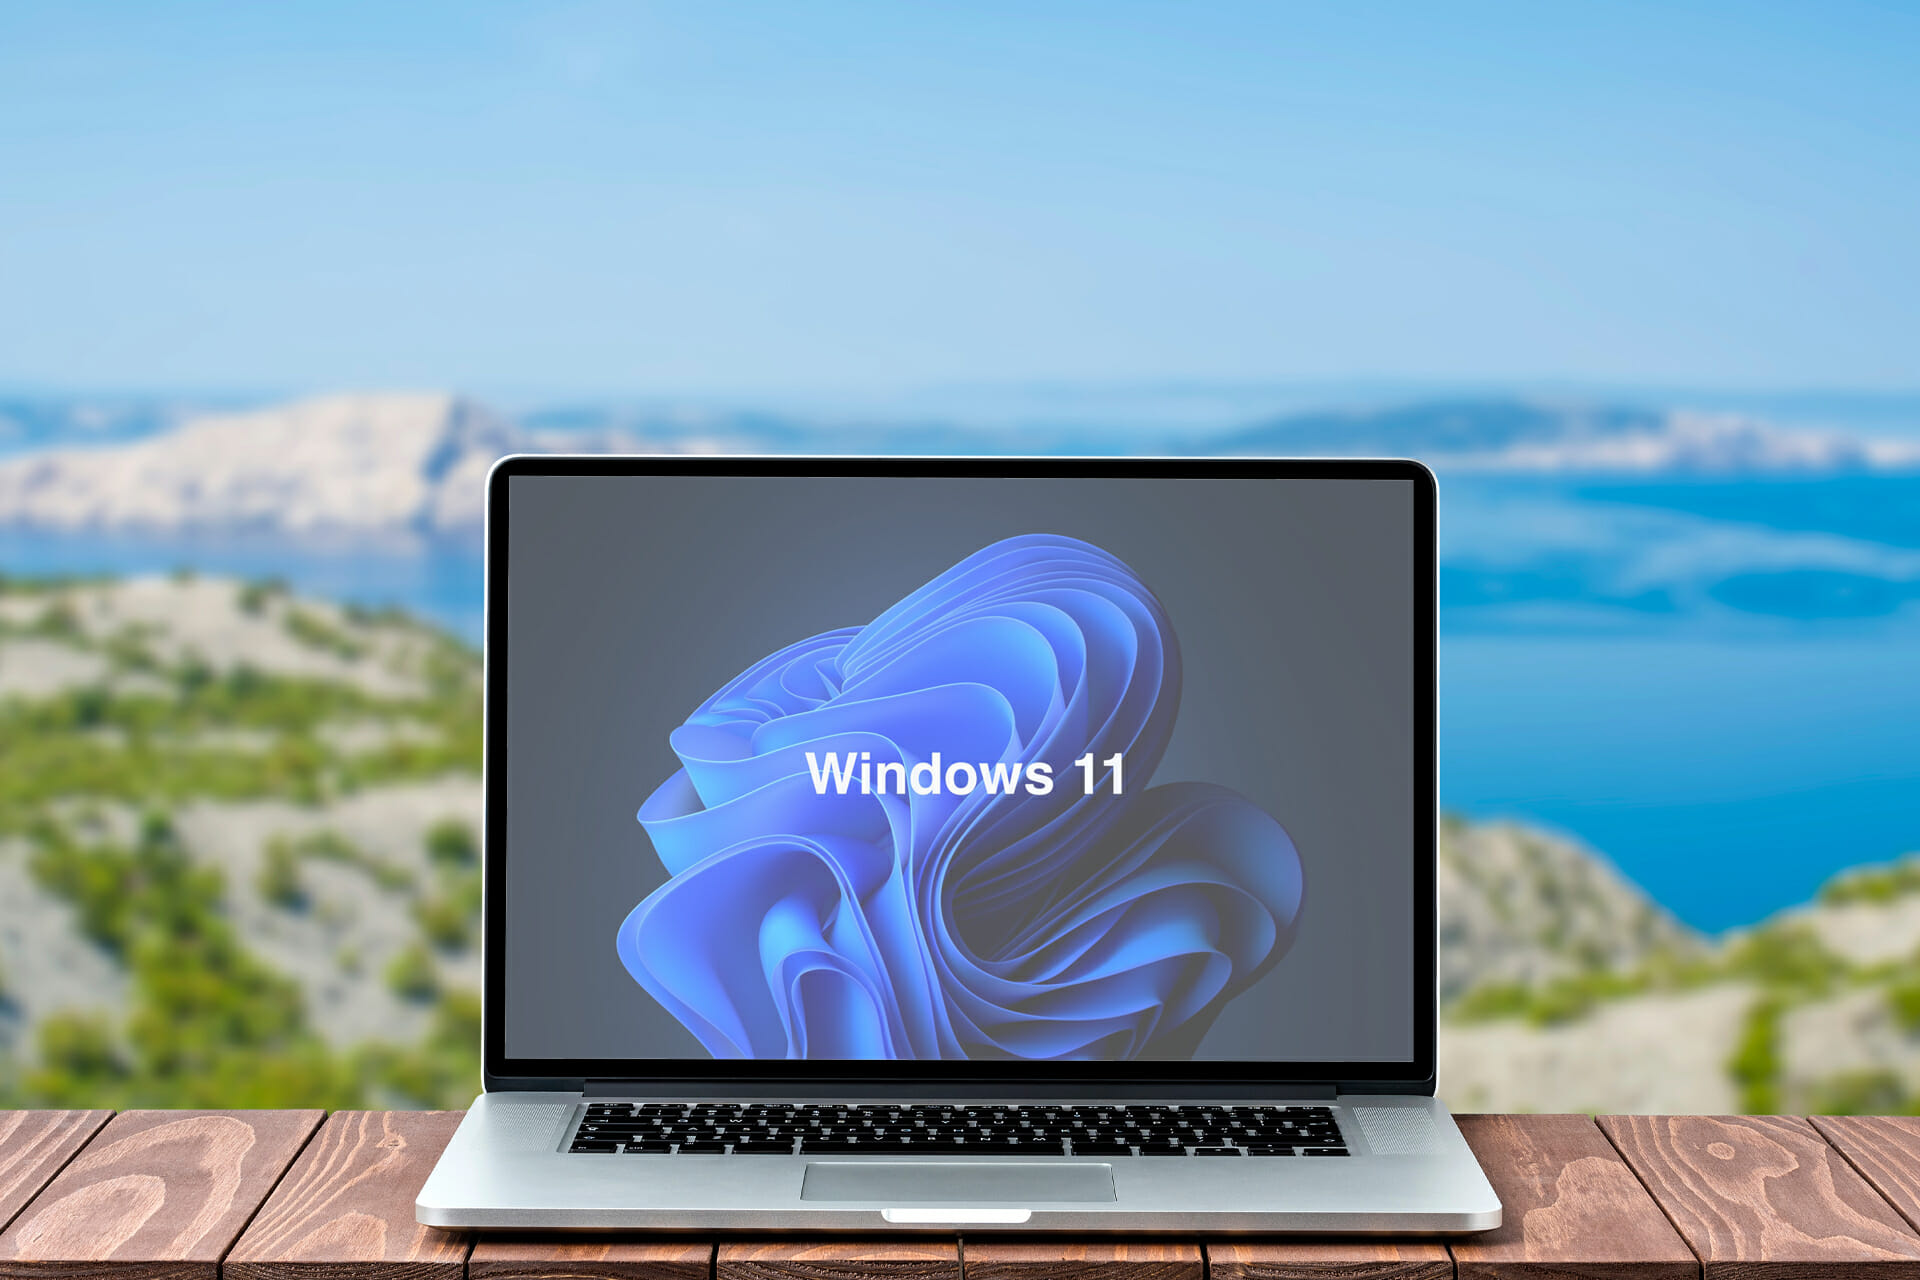 Windows 7 users are thrilled about the upgrade